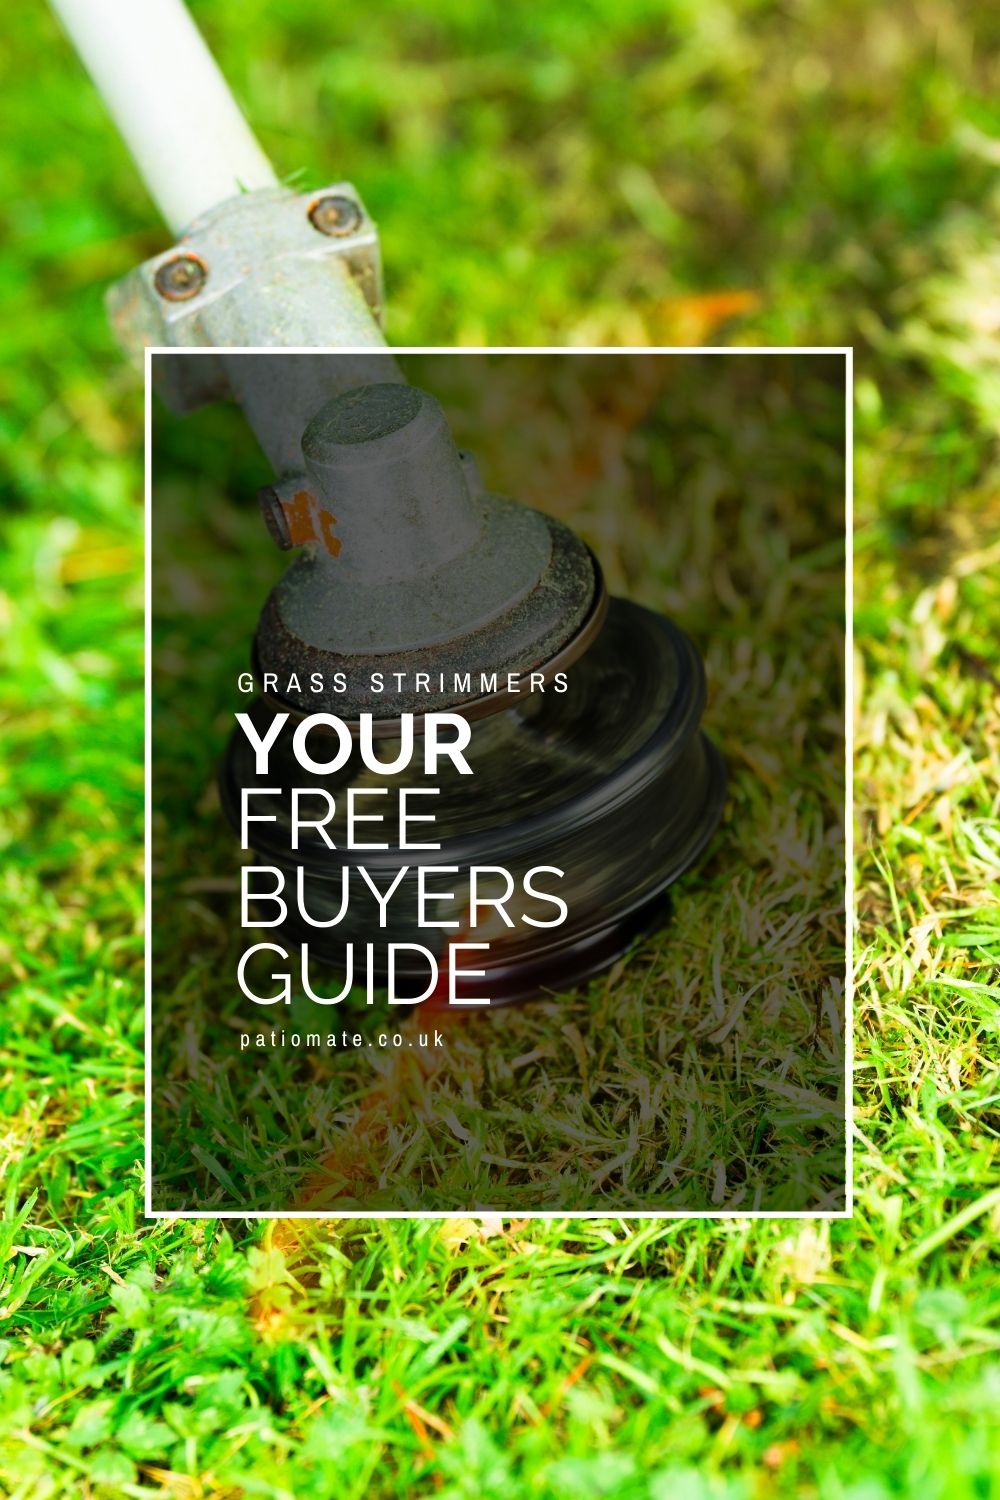 Grass Strimmers - Your Free Buyers Guide